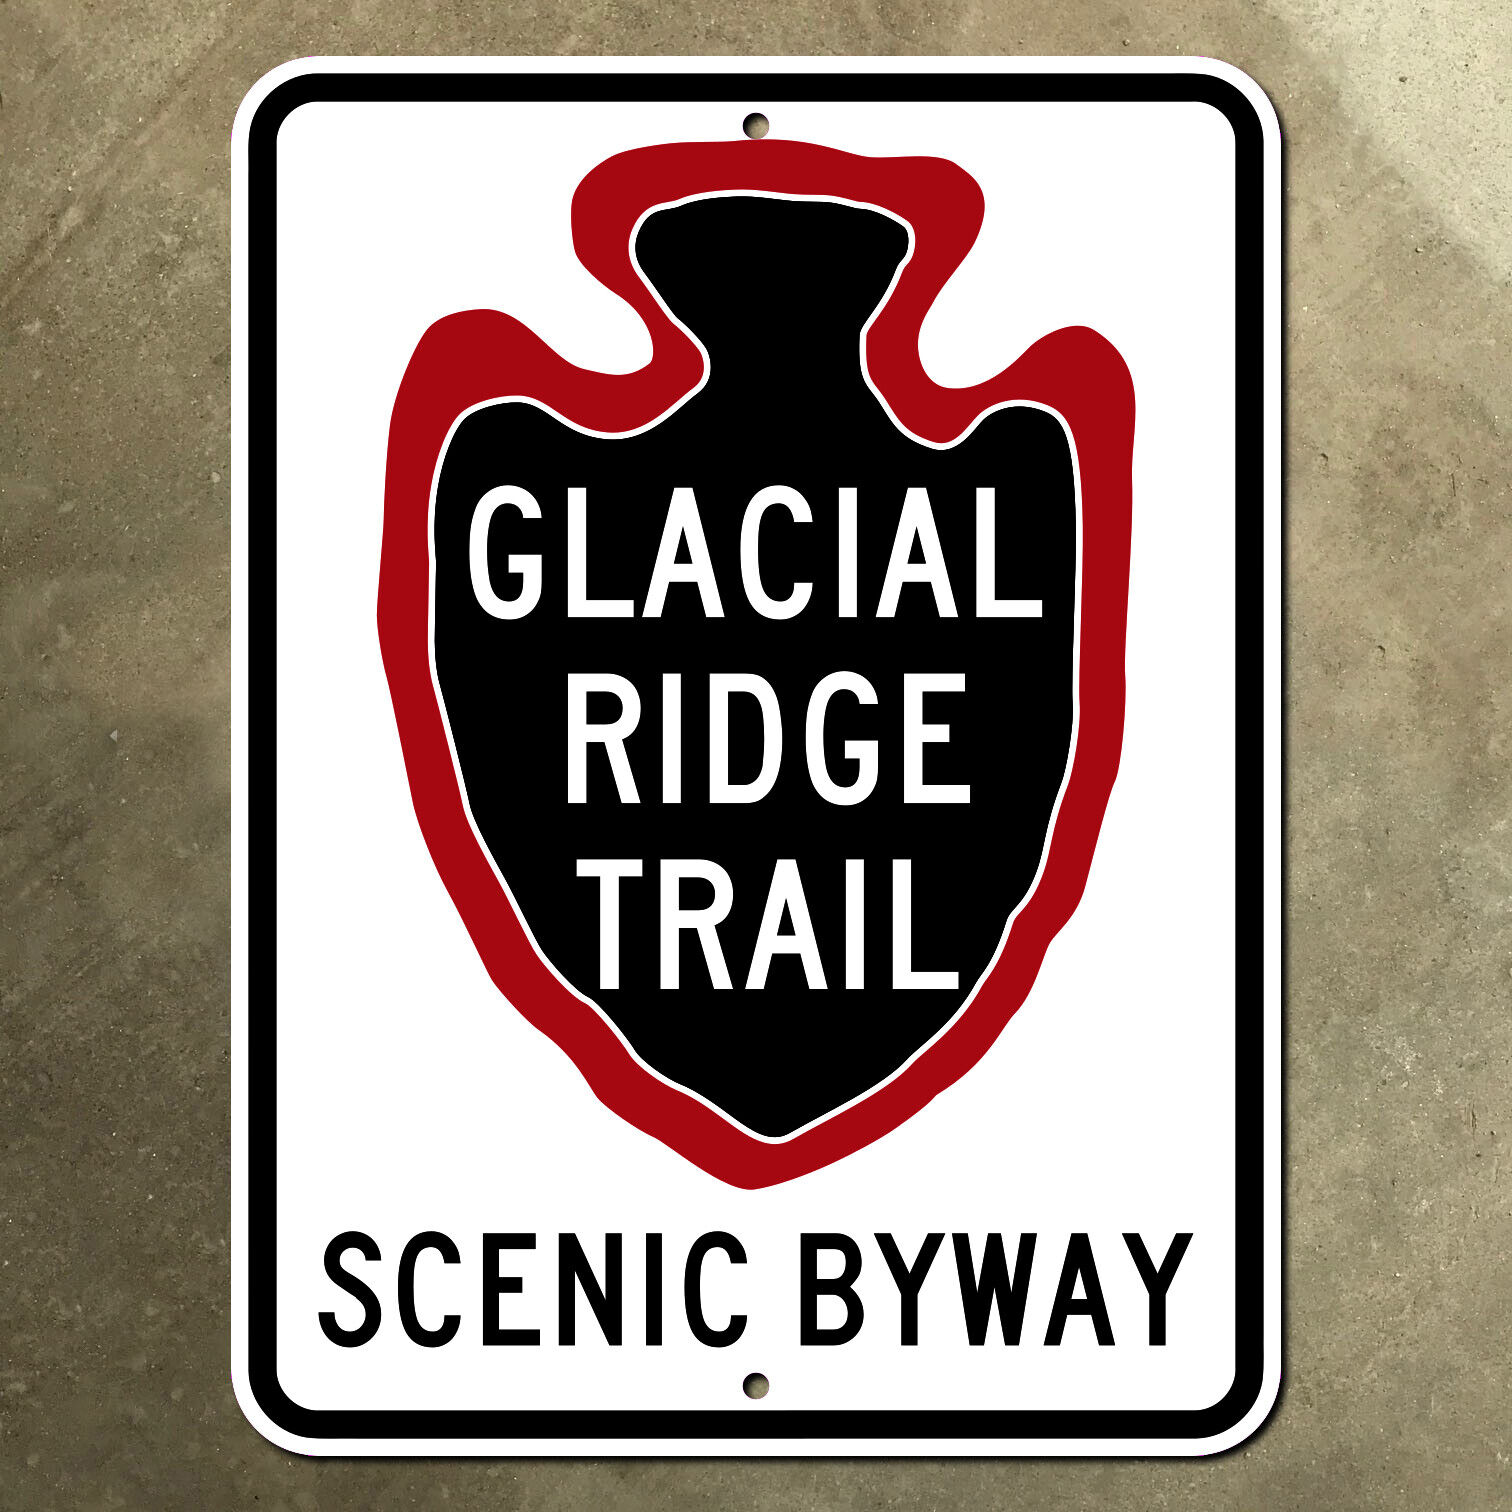 Minnesota Glacial Ridge Trail route marker highway road sign 1990s scenic 11x14